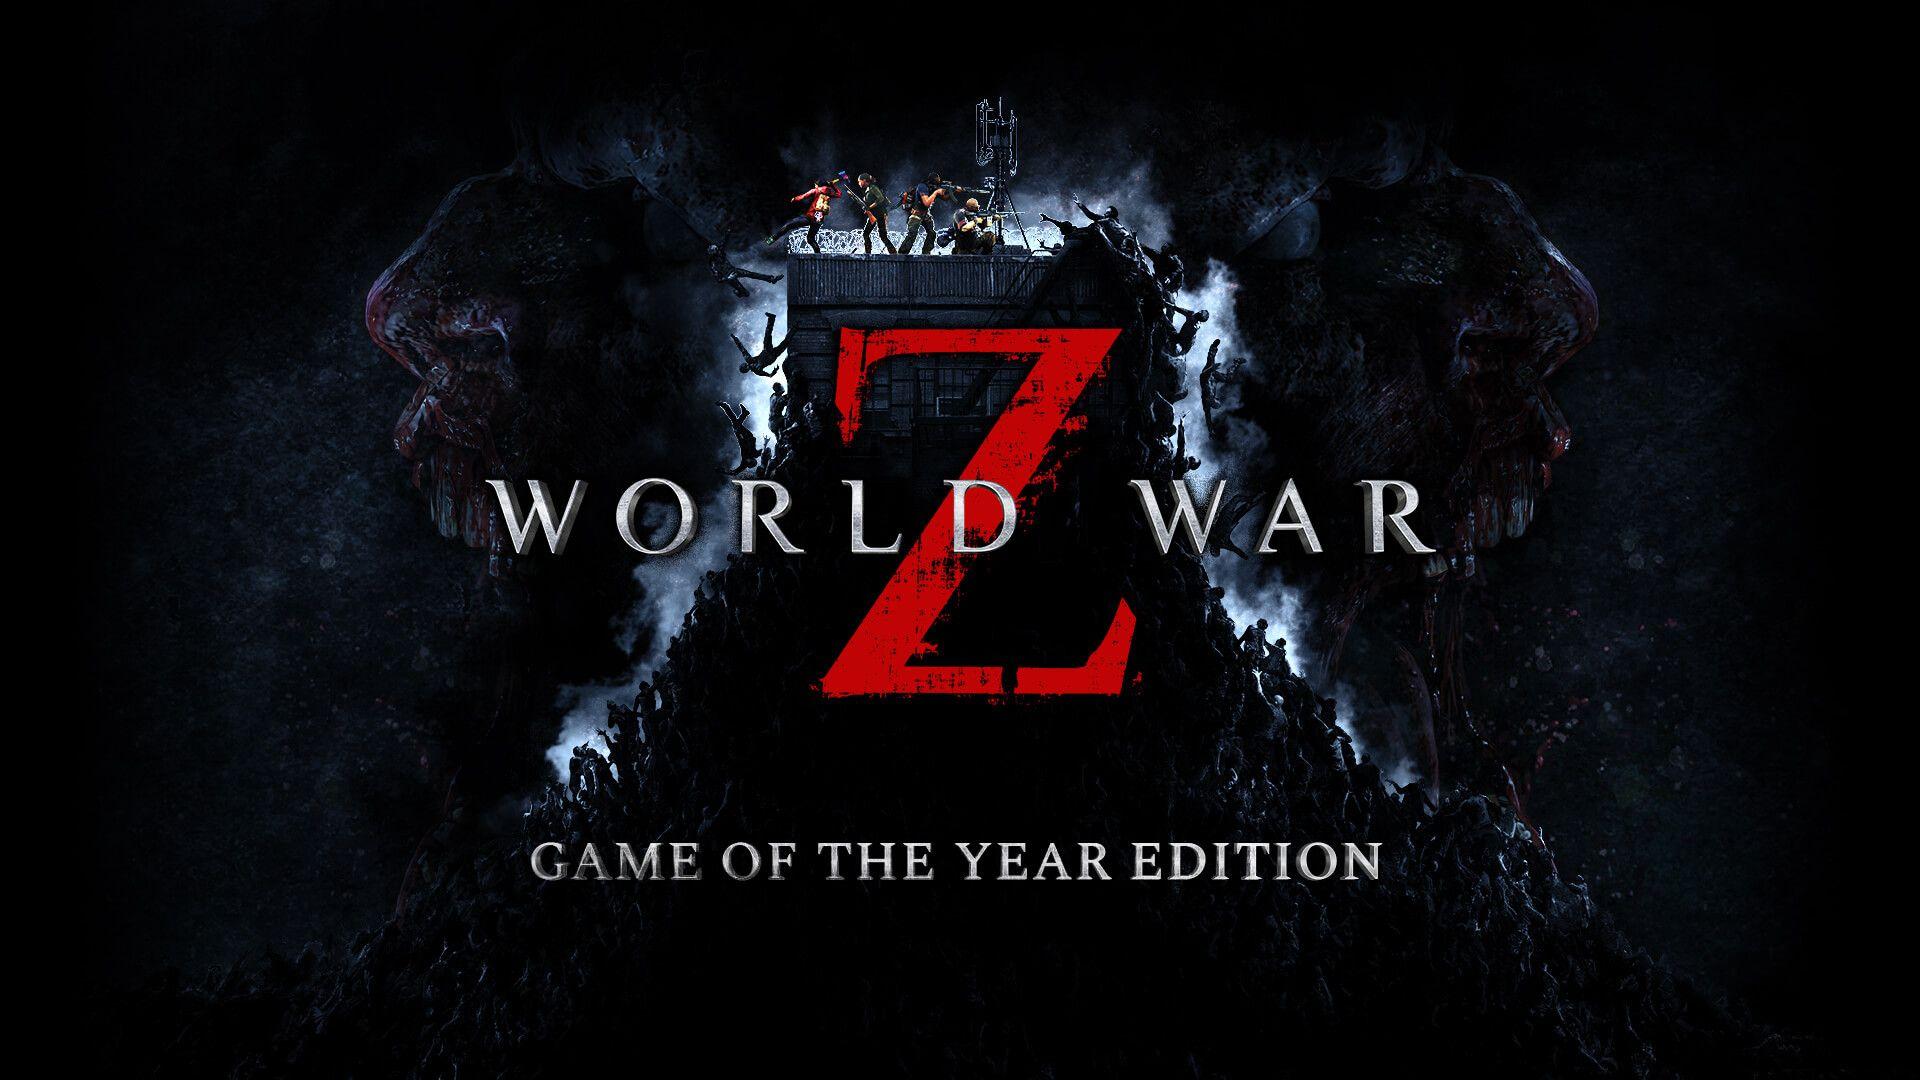 World War Z Game Wallpapers - Top Free World War Z Game Backgrounds ...